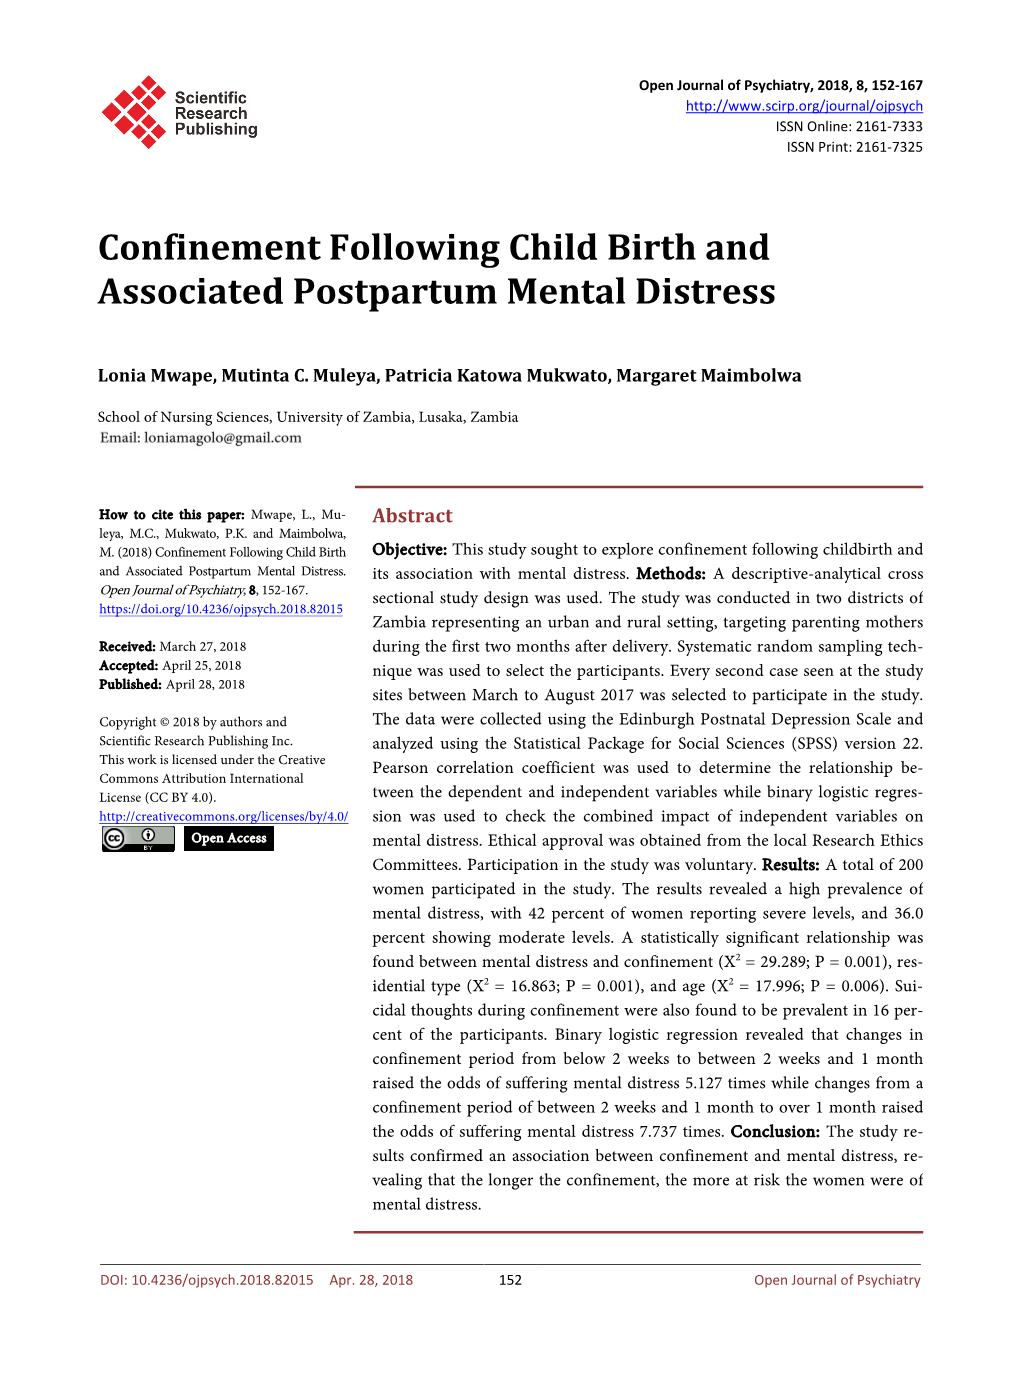 Confinement Following Child Birth and Associated Postpartum Mental Distress